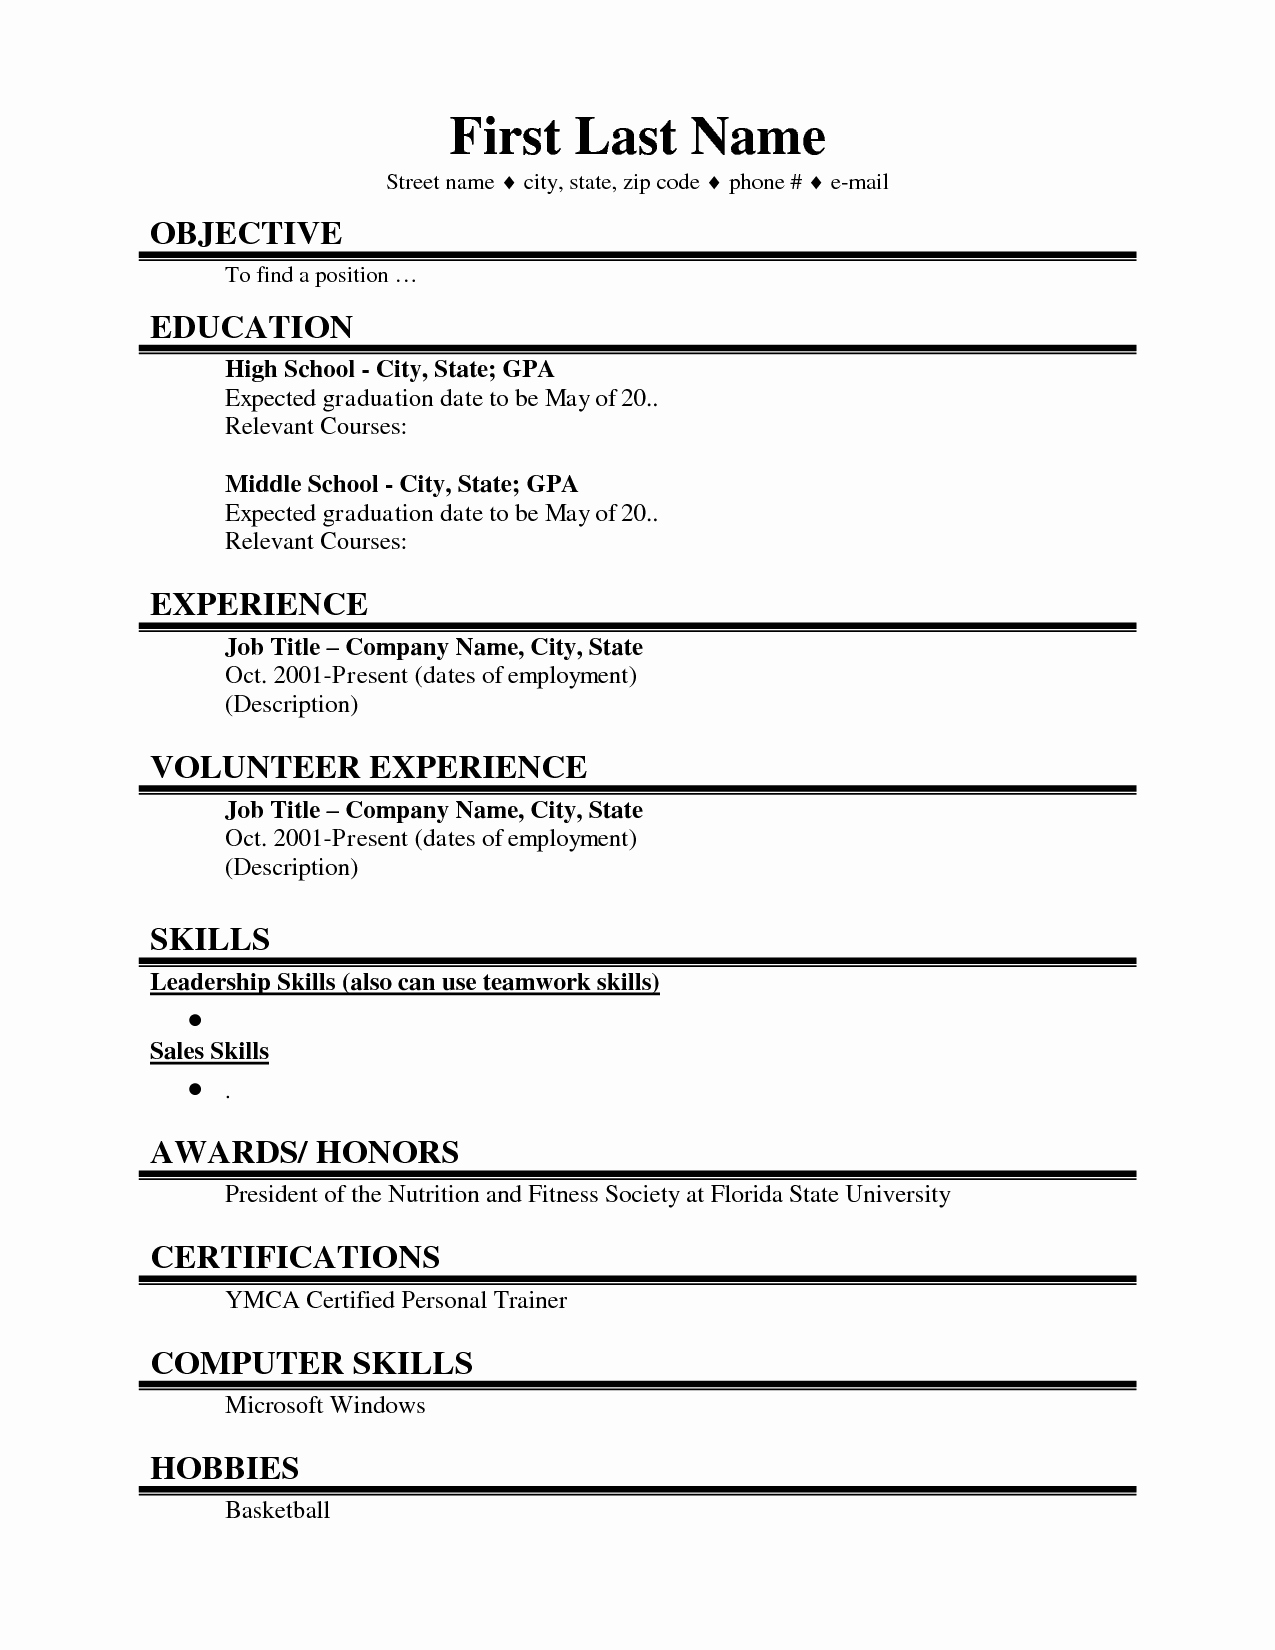 Resumes for High School Students Awesome First Job Resume Google Search Resume